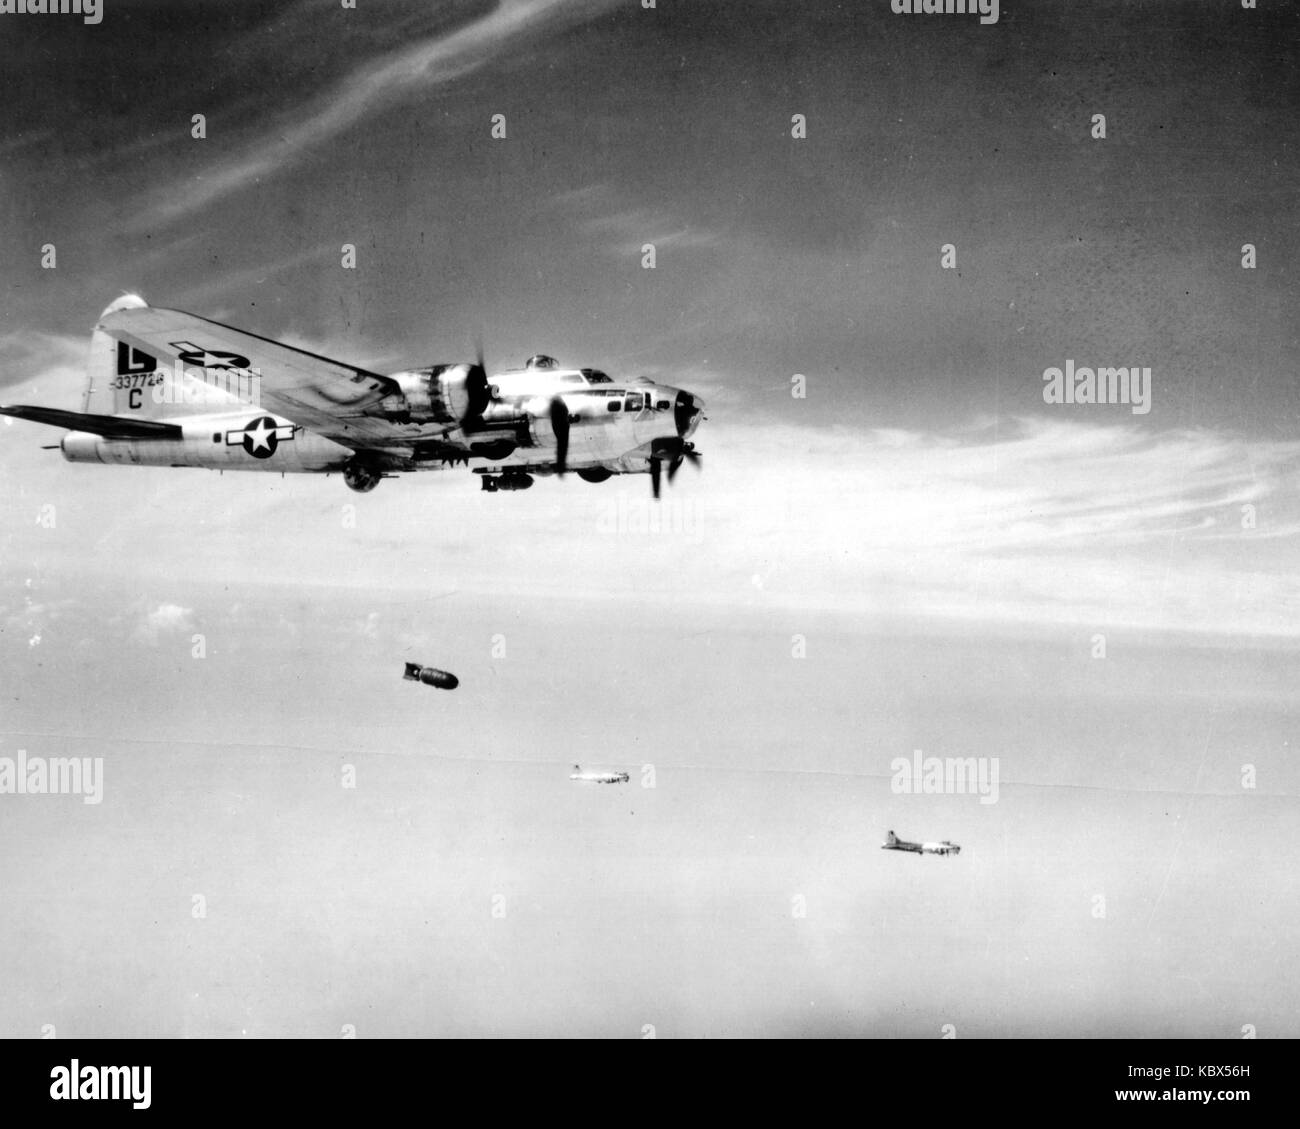 Boeing B-17 Flying Fortress. American bomber plane in action during World War II Stock Photo